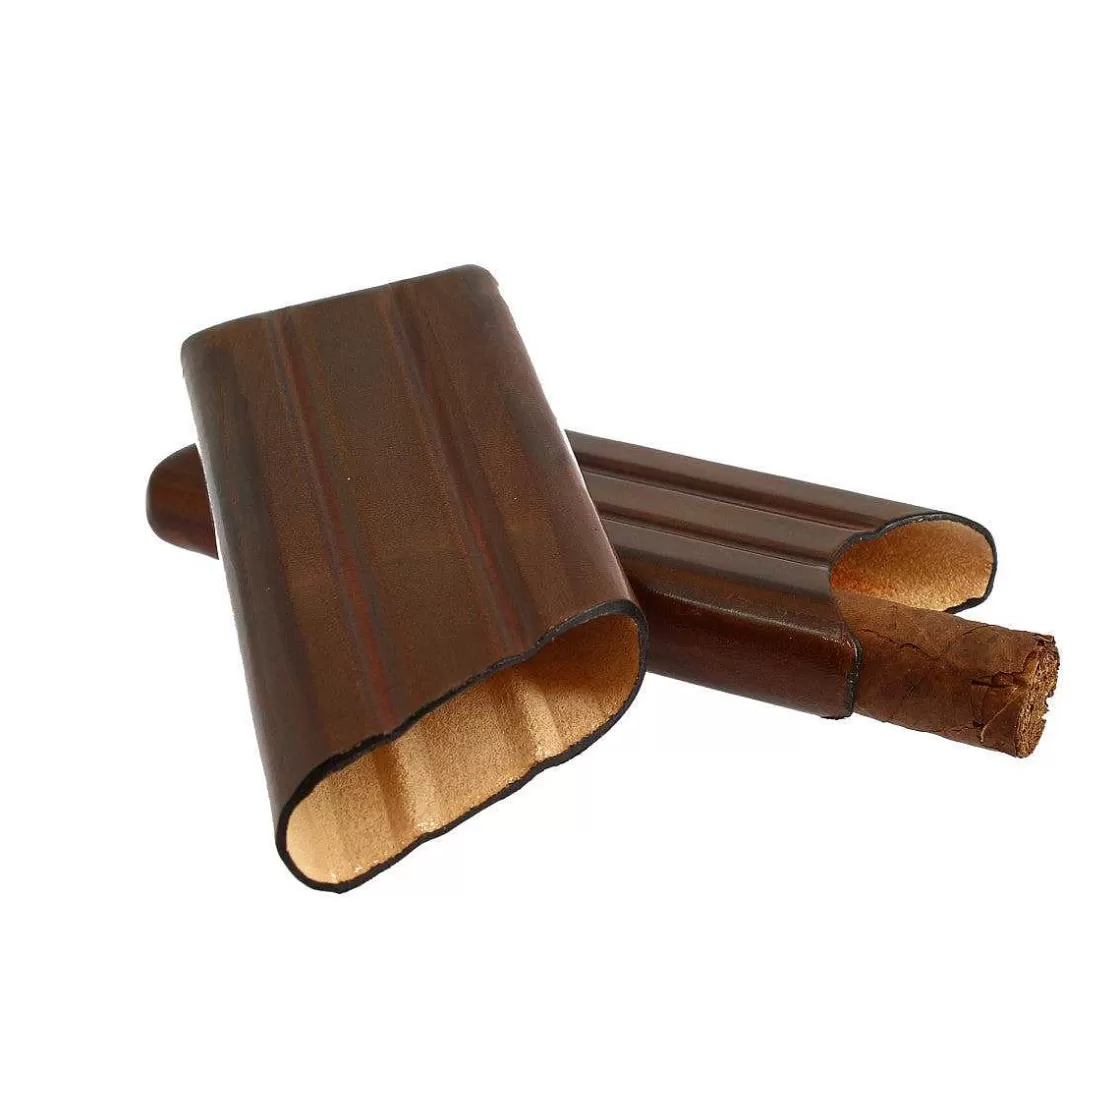 Leonardo Cigar Holder Made Of Pocket Leather Available In Two Colors Online